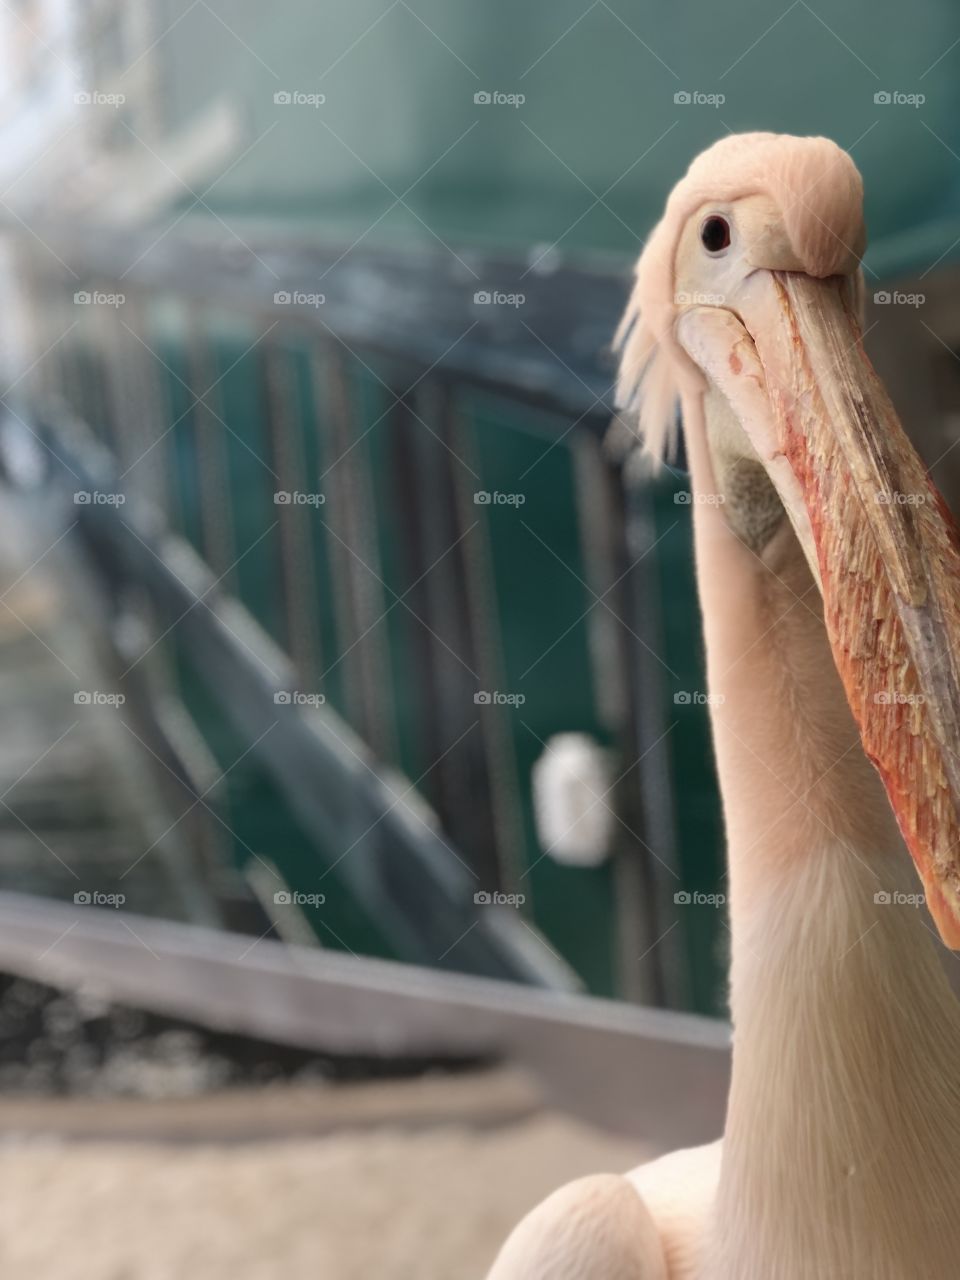 Pelican from the Clearwater aquarium, Florida 